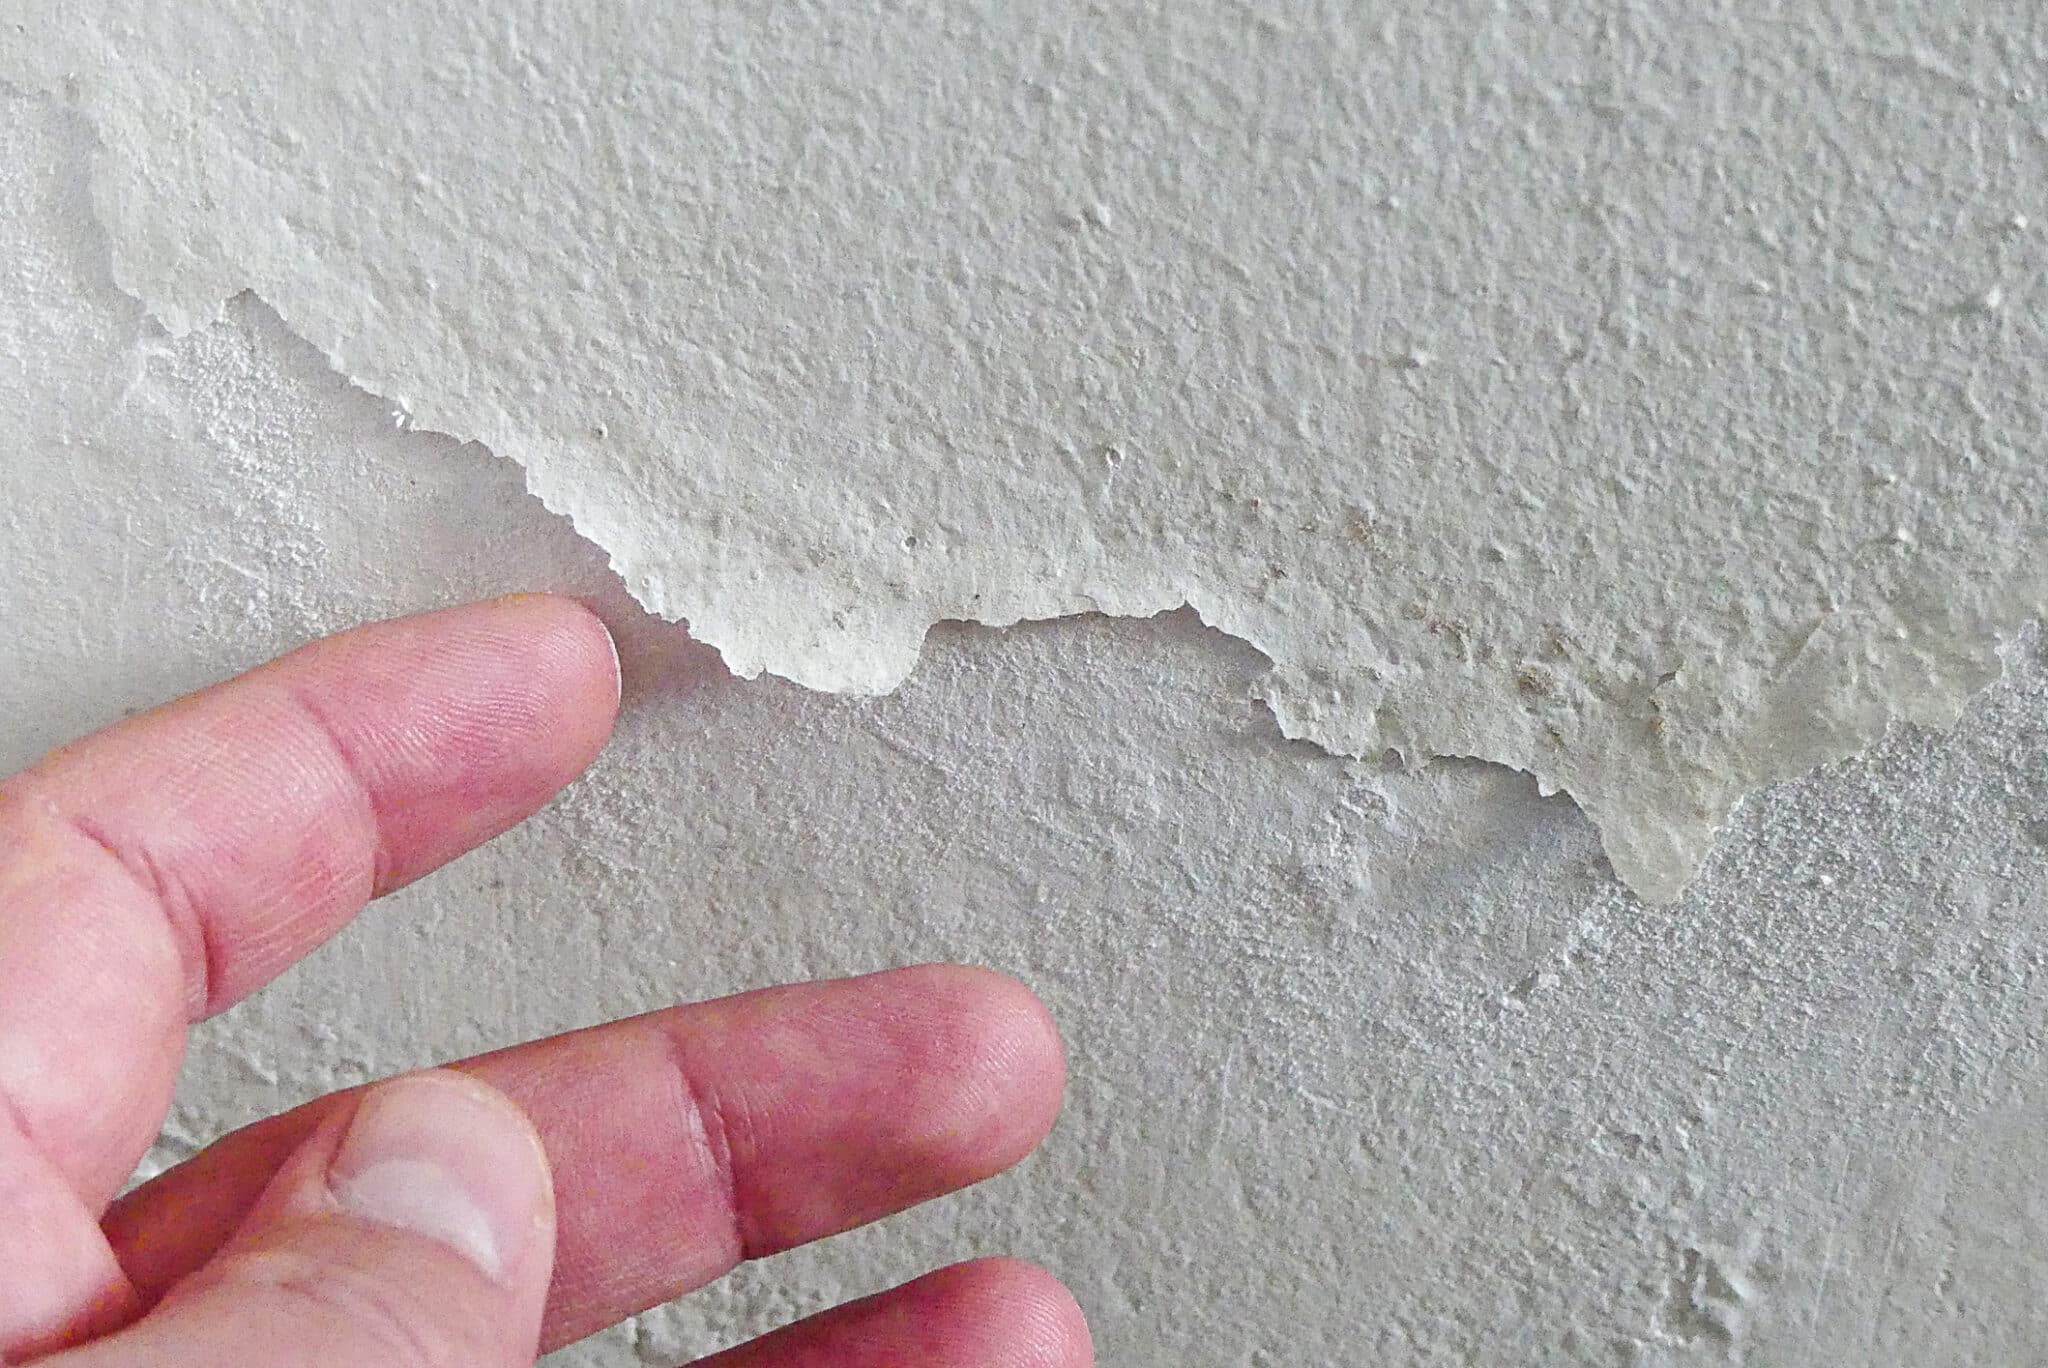 The paint on the wall of a house is peeling and blistering.